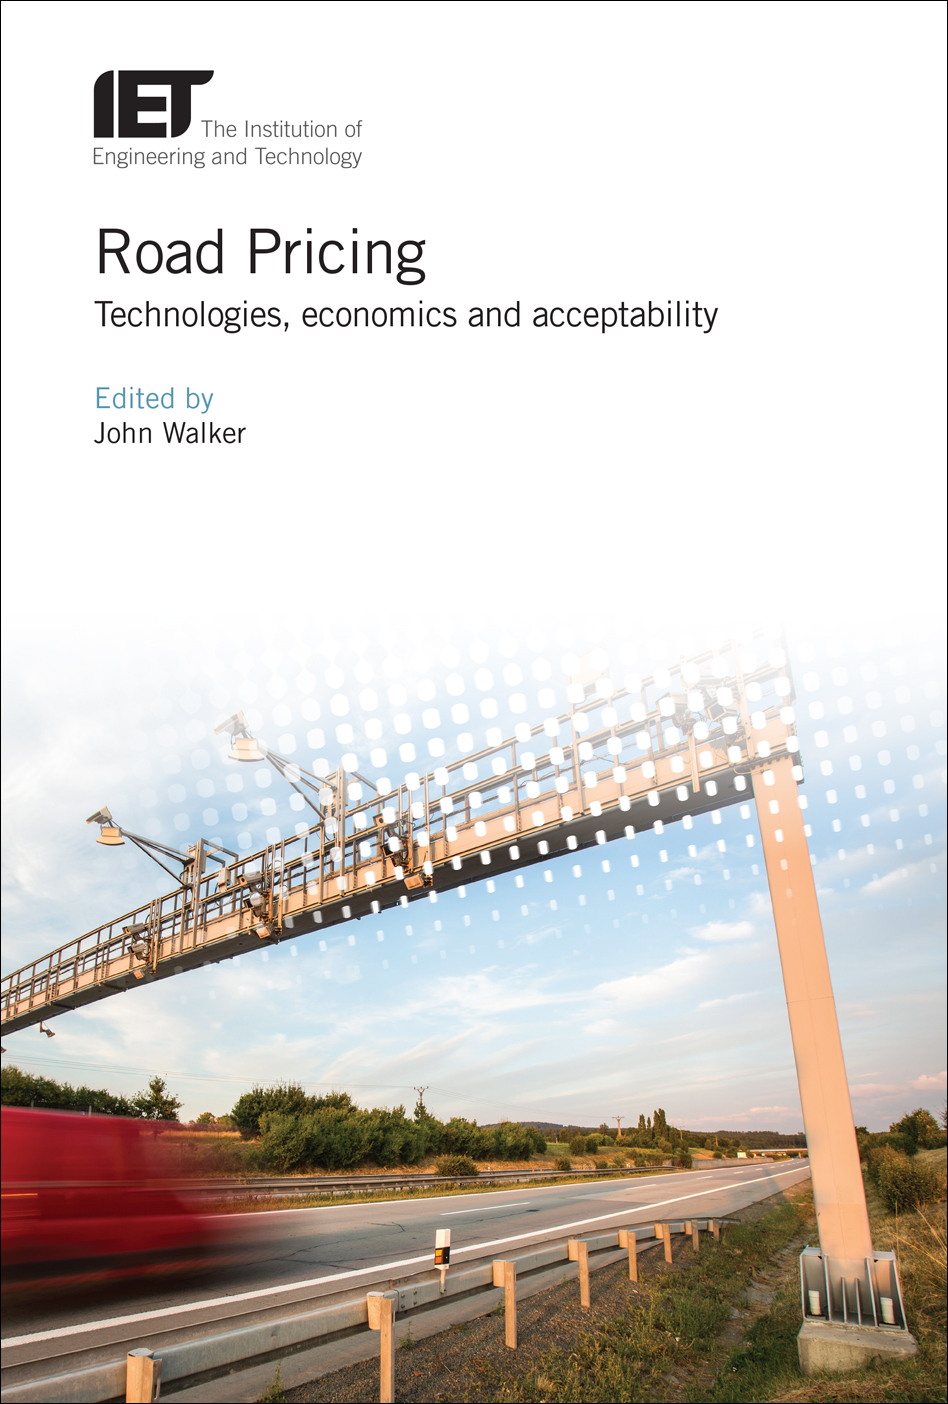 Road Pricing, Technologies, economics and acceptability